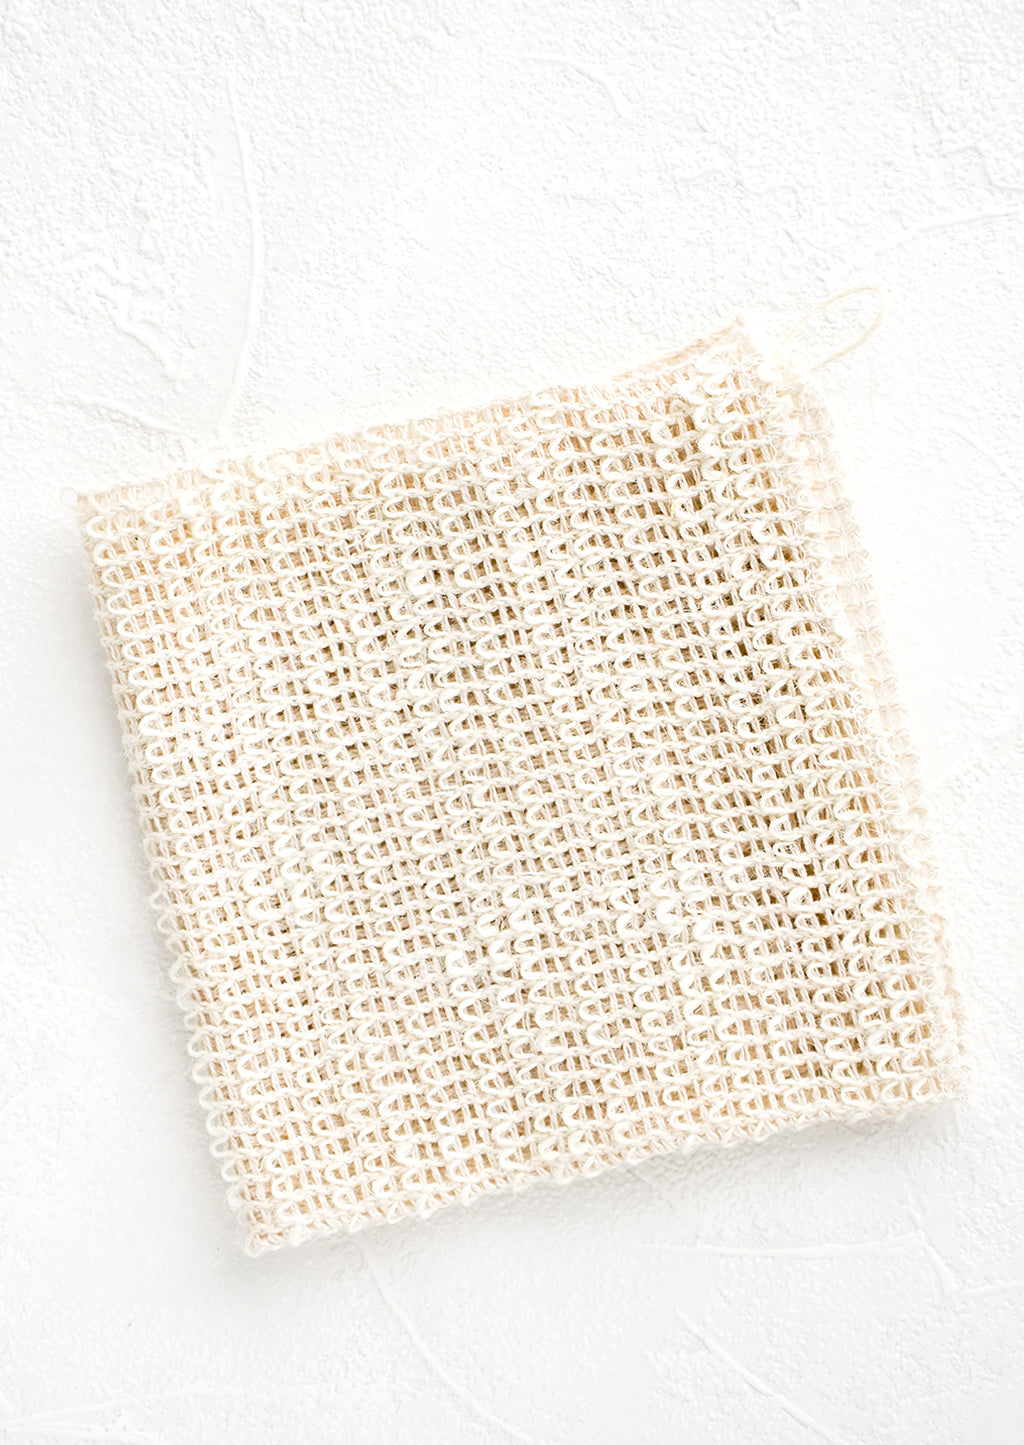 2: A folded washcloth made from natural sisal with a hanging loop at one corner.